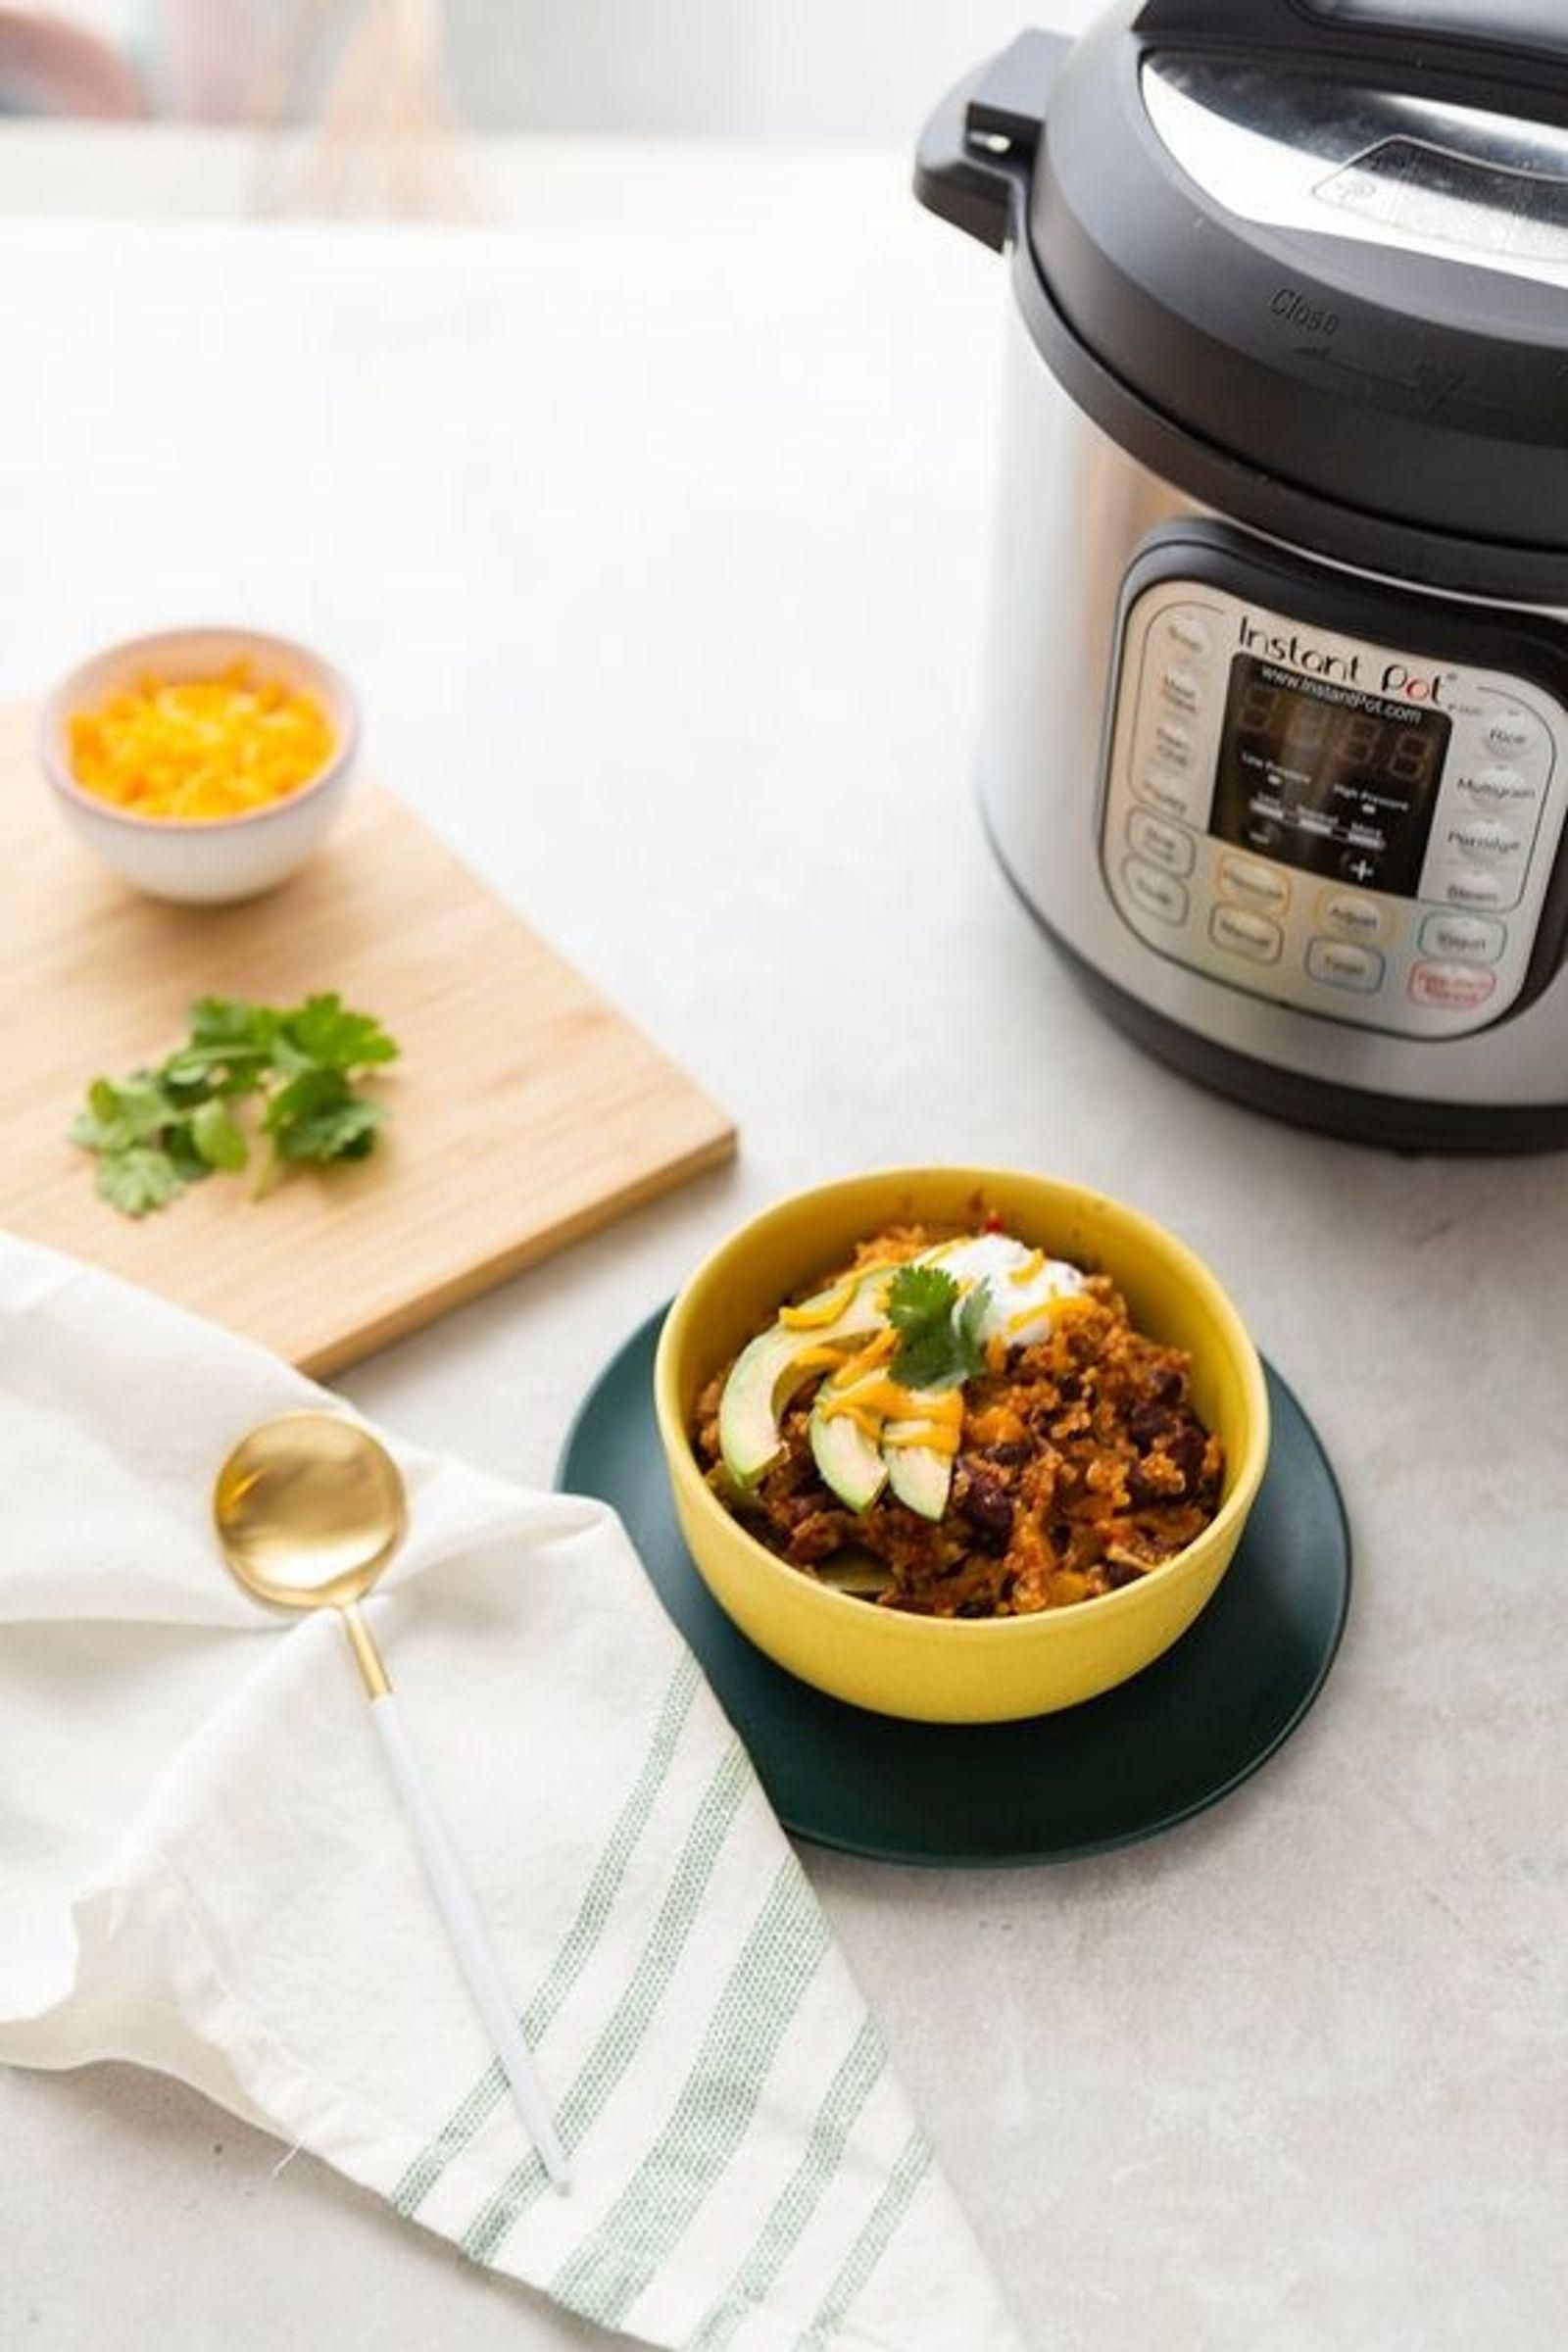 Instant Pot  Electric Pressure Cookers - My Food Story